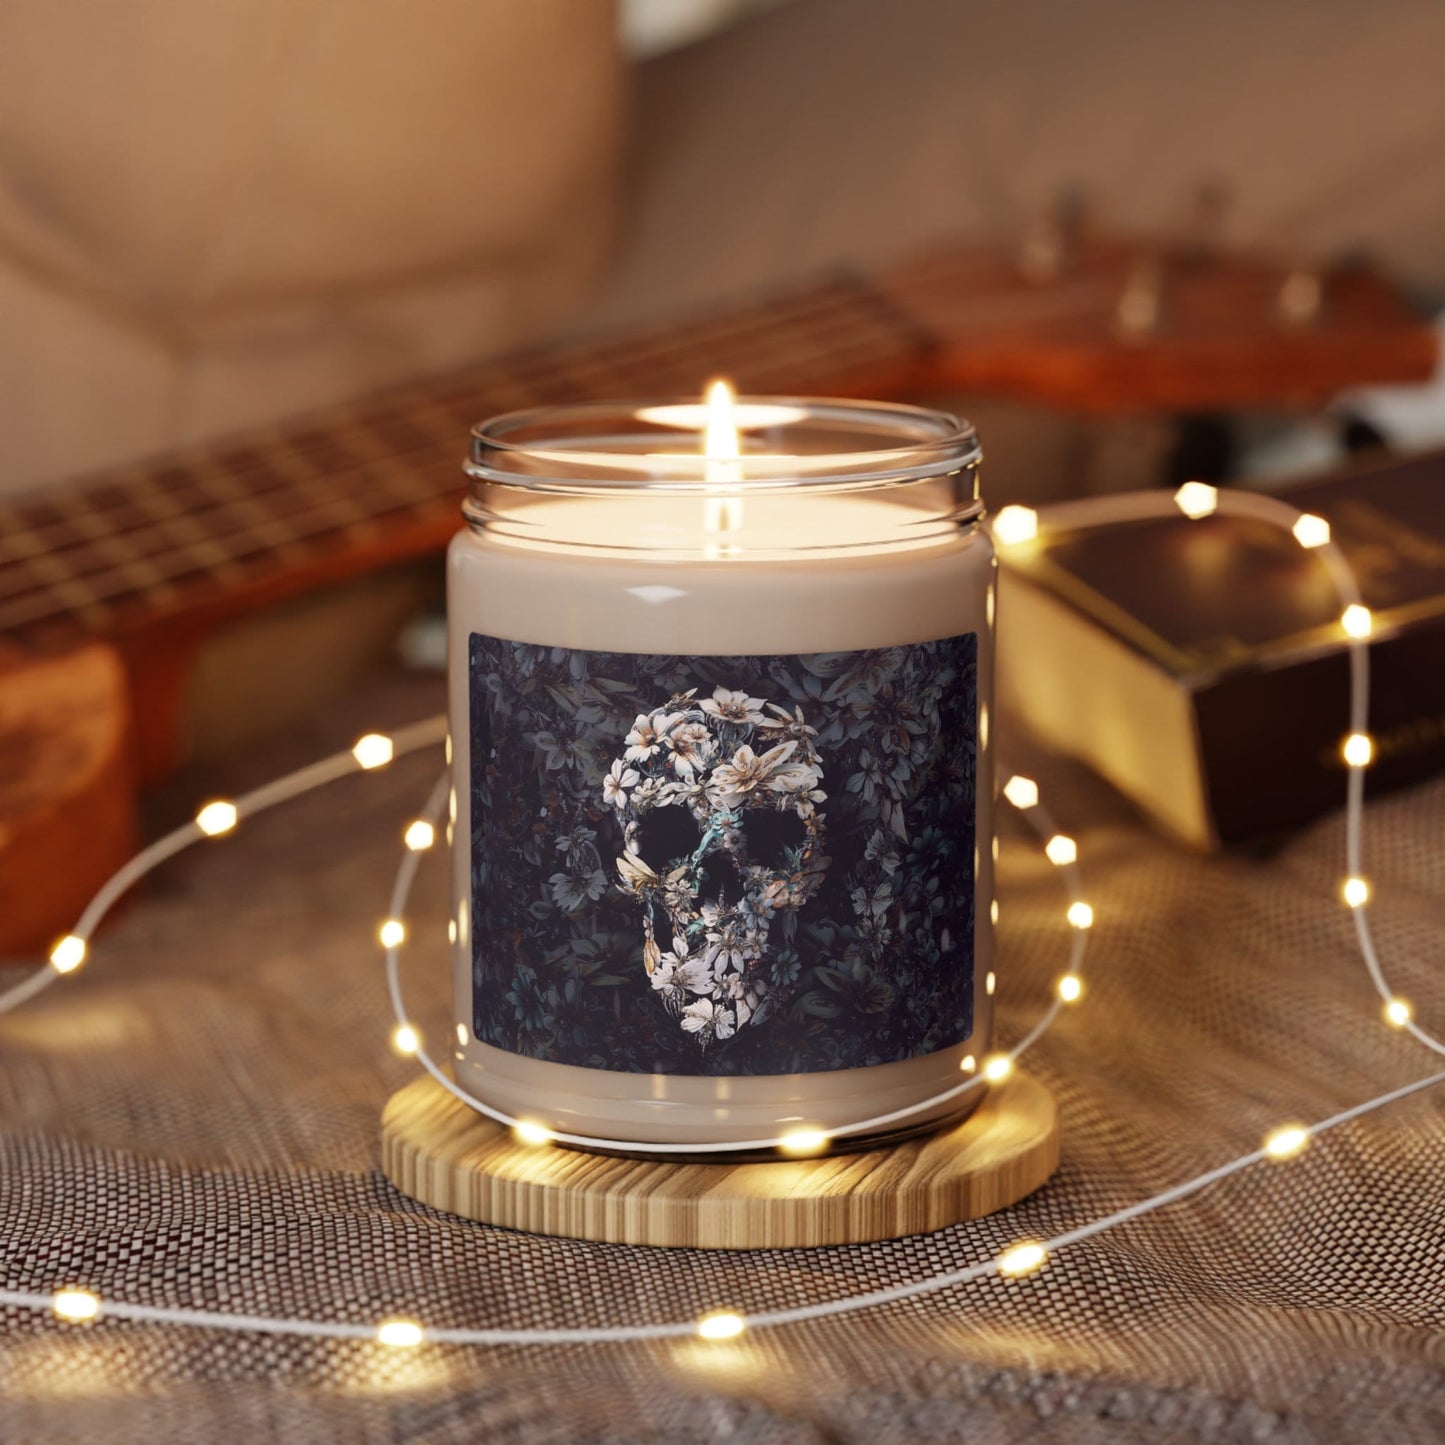 Gothic Scented Soy Candle, 9oz, Aromatic Sugar Skull Print Candle Home Decor